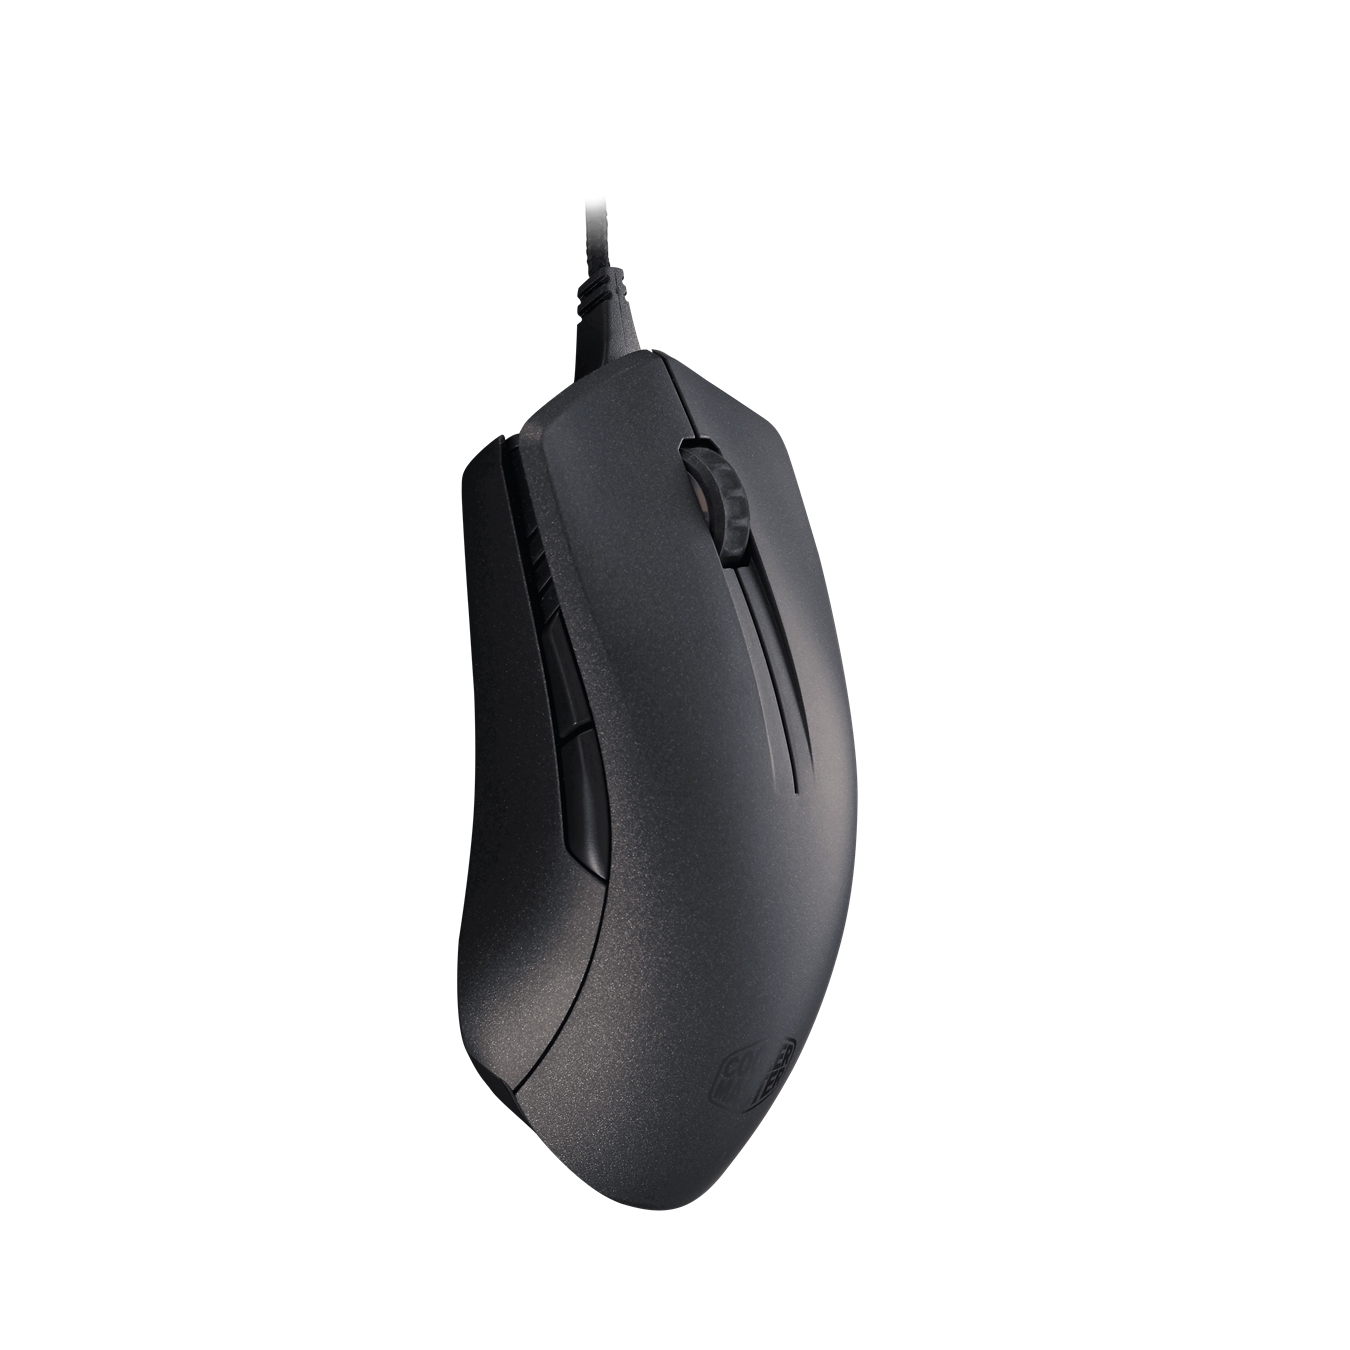 MasterMouse Pro L - Long-lasting Omron switches and advanced optical Avago Sensor with up to 12000 DPI.